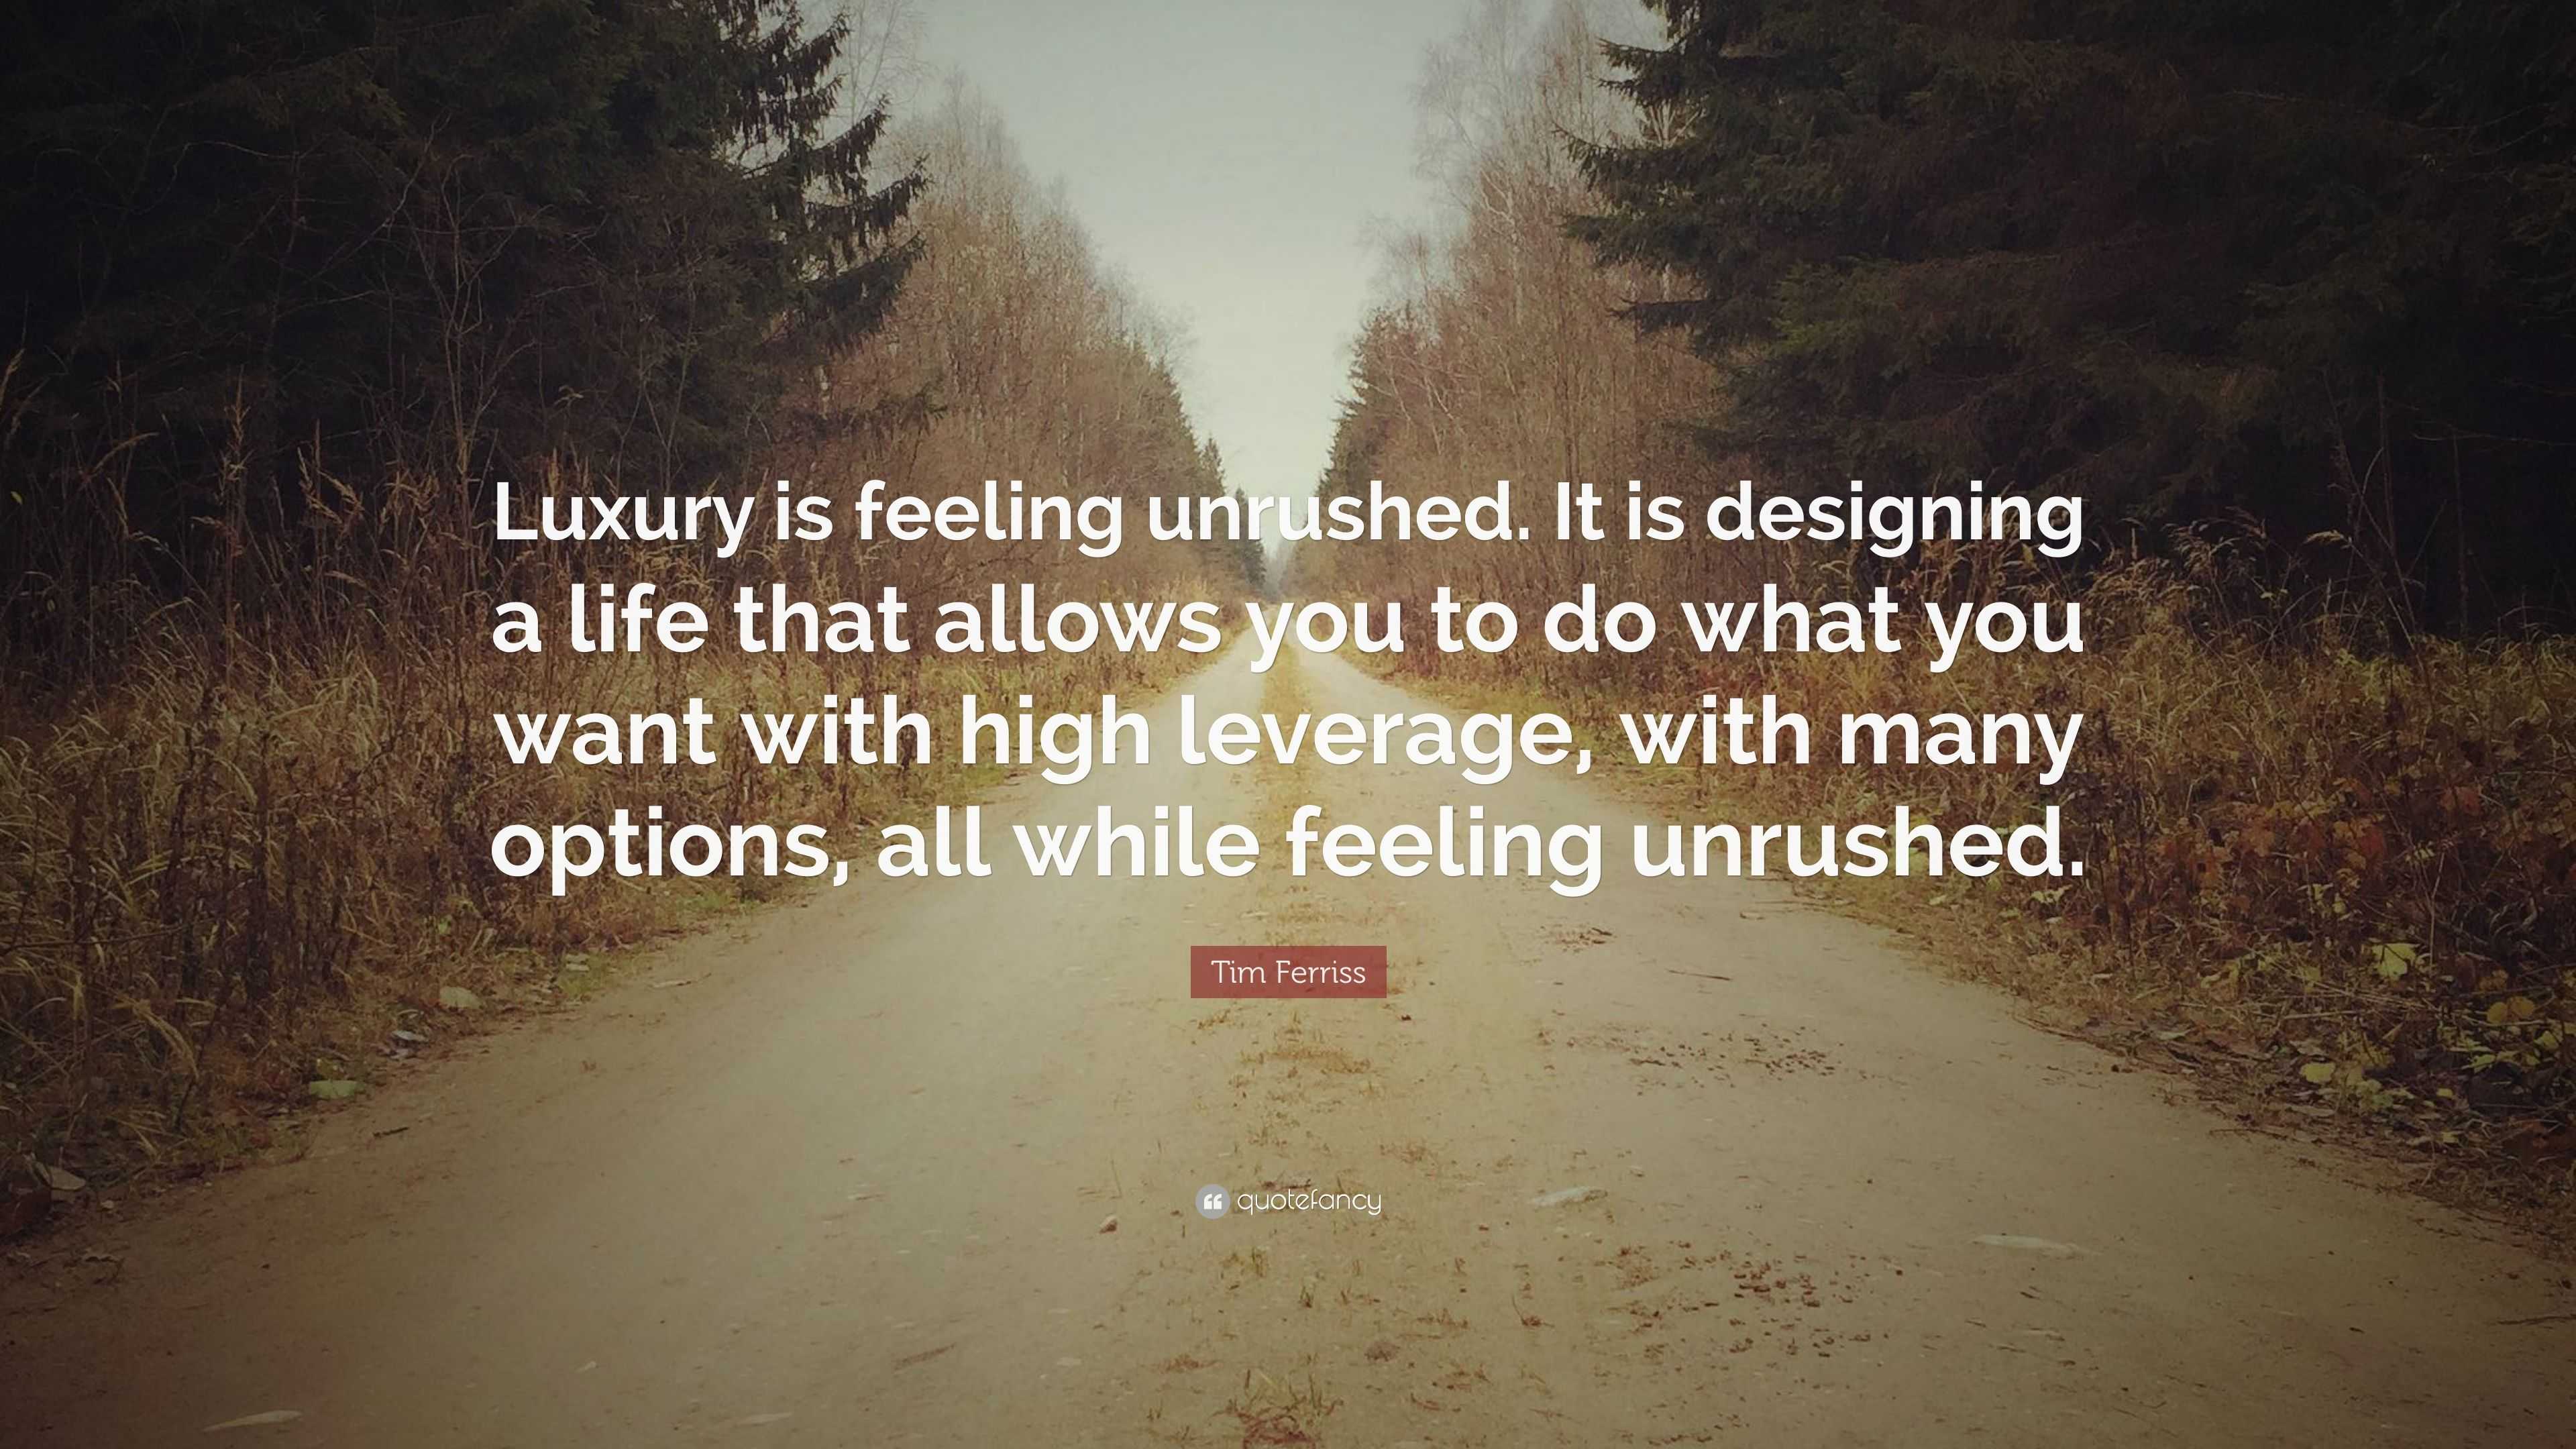 Tim Ferriss Quote: “Luxury is feeling unrushed. It is designing a life ...